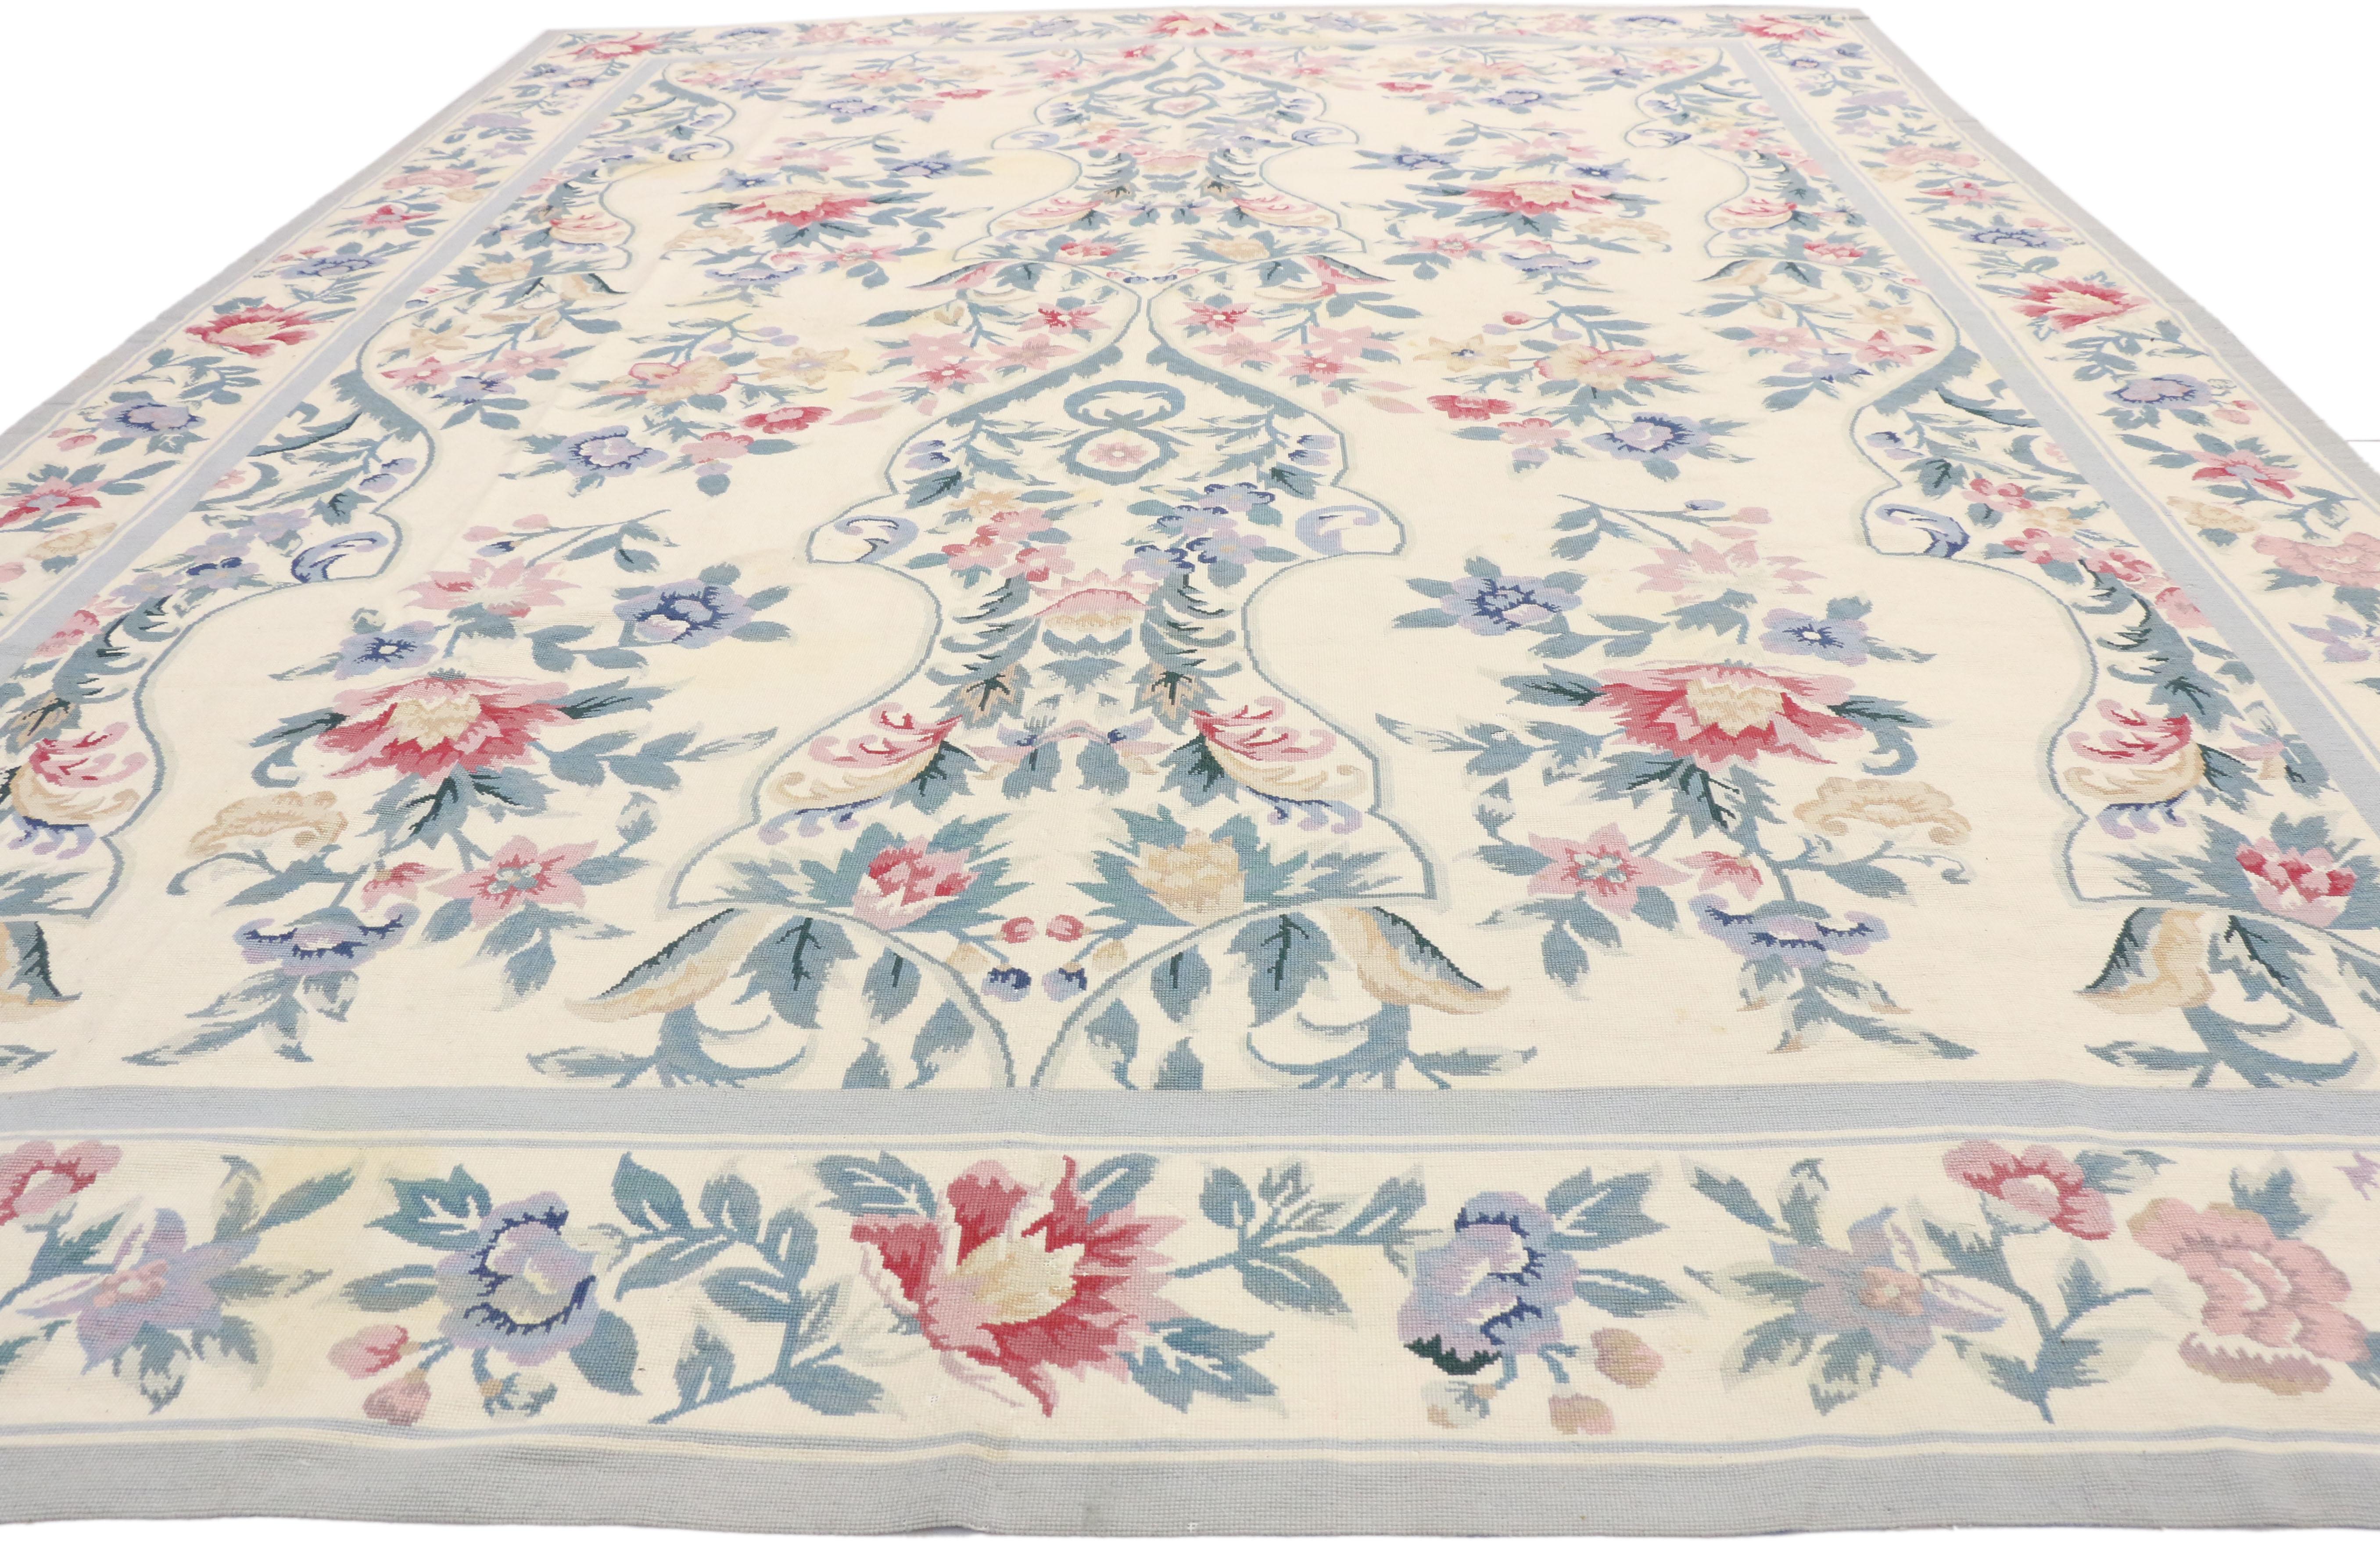 Hand-Crafted Vintage French Aubusson Style Needlepoint Chinese Rug with Chintz Style